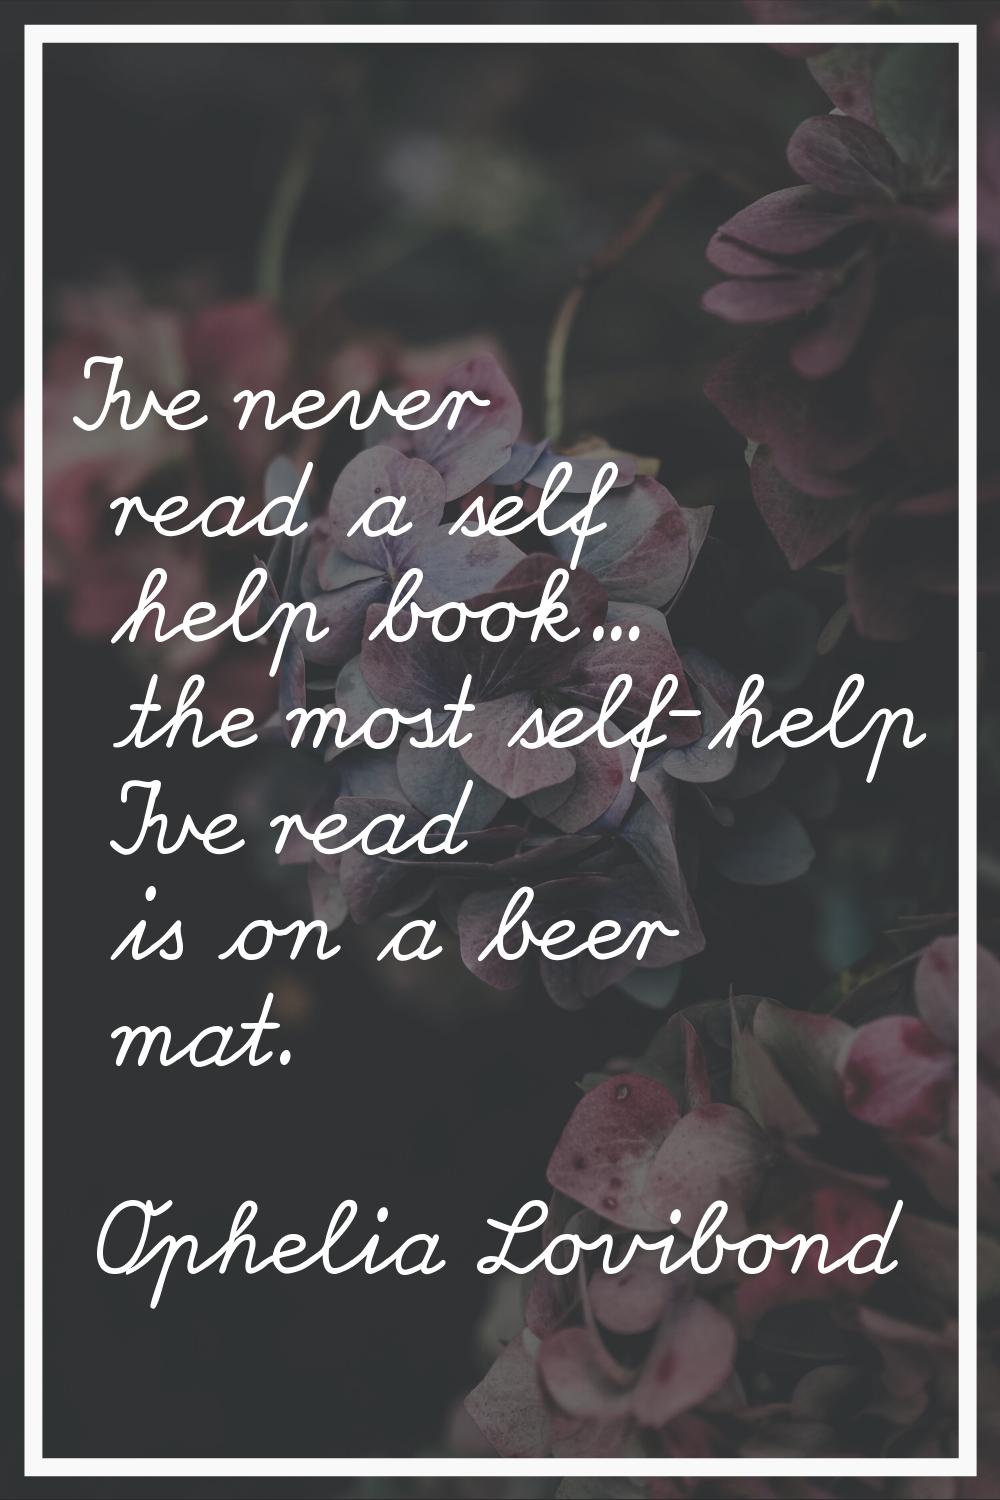 I've never read a self help book... the most self-help I've read is on a beer mat.